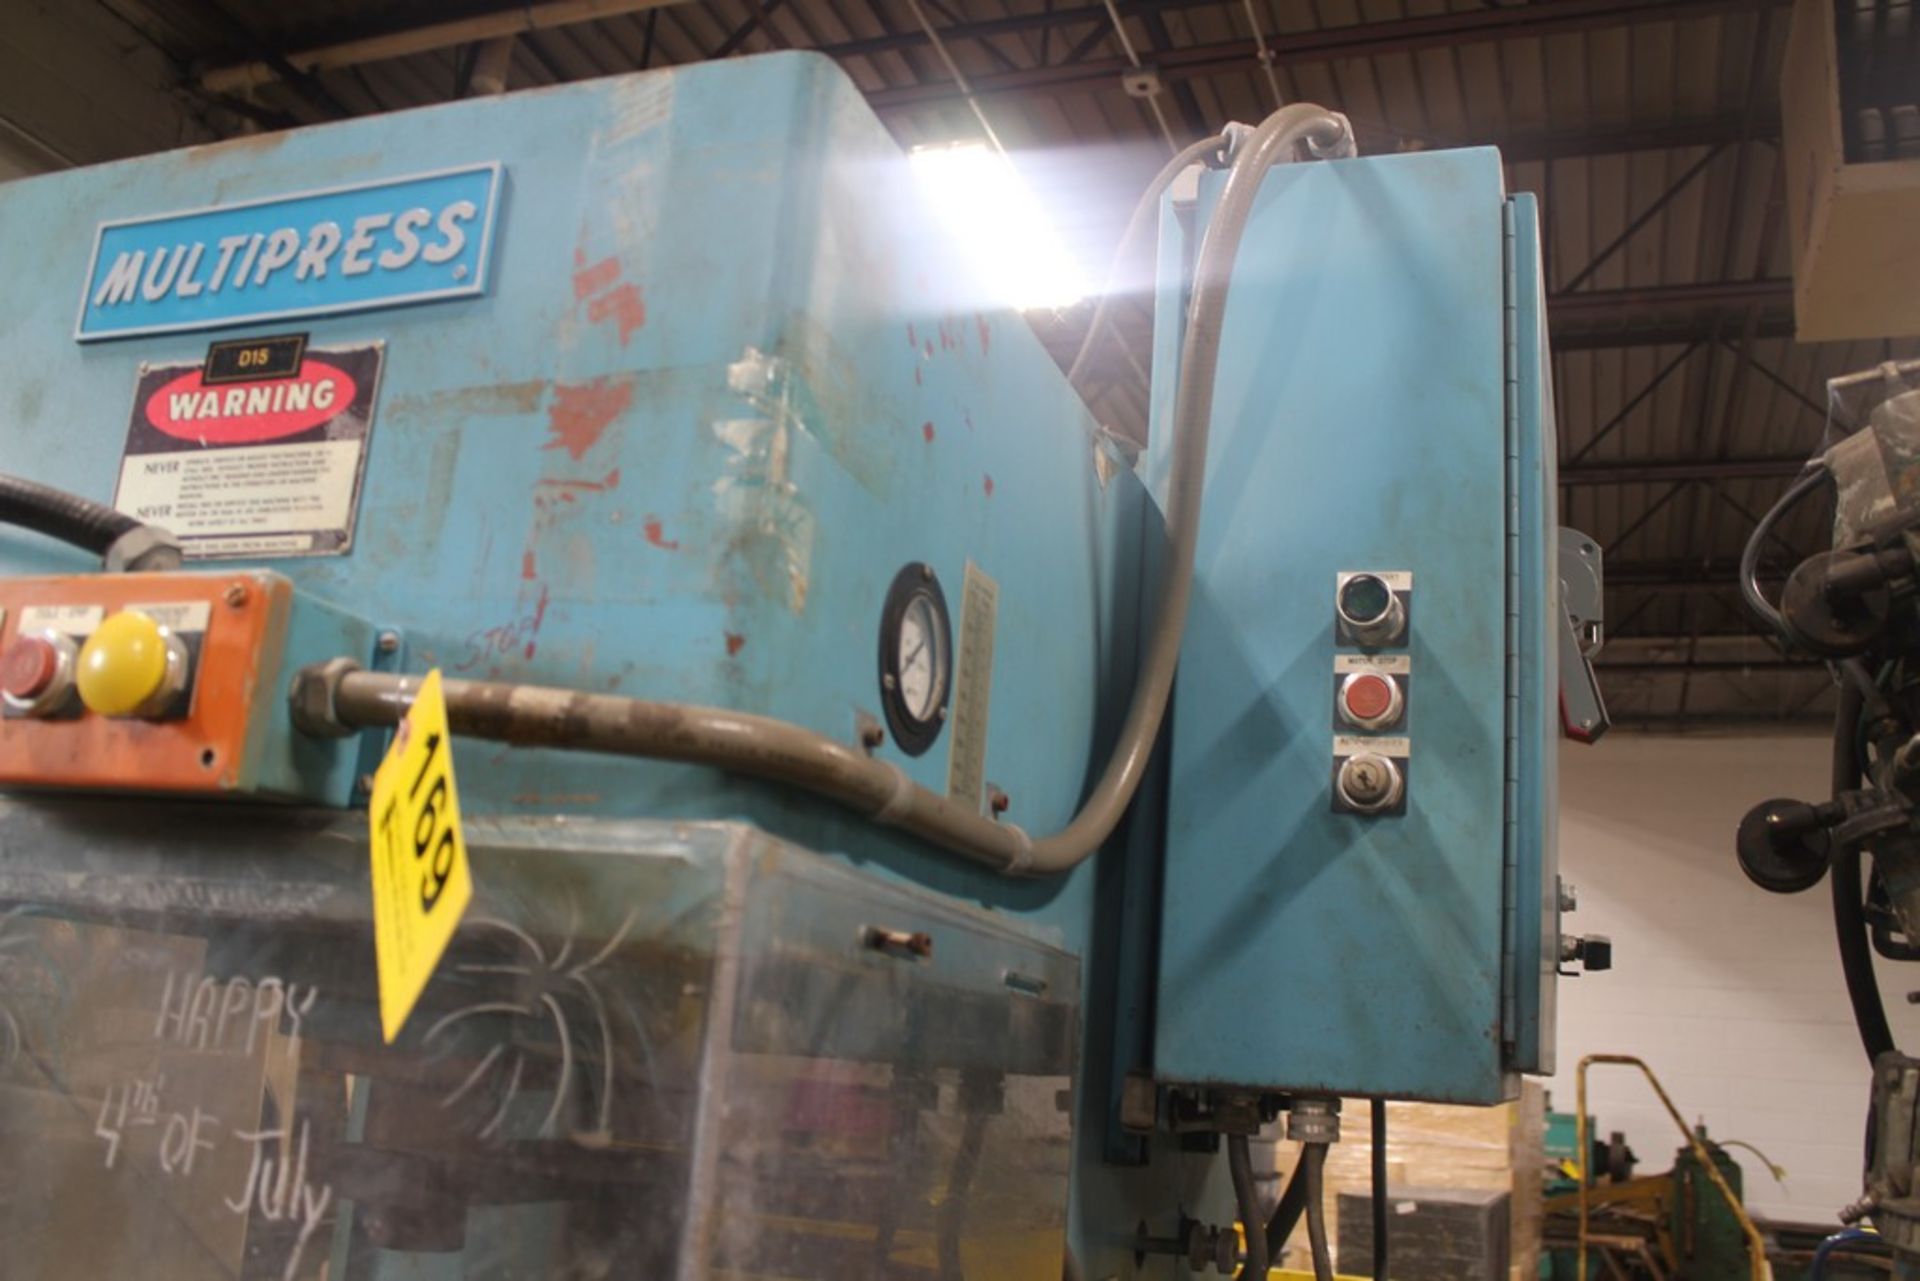 MULTIPRESS MODEL WT-100M 10 TON HYDRAULIC PRESS, WITH MODEL IT-103 INDEX TABLE, S/N 30208 - Image 4 of 8